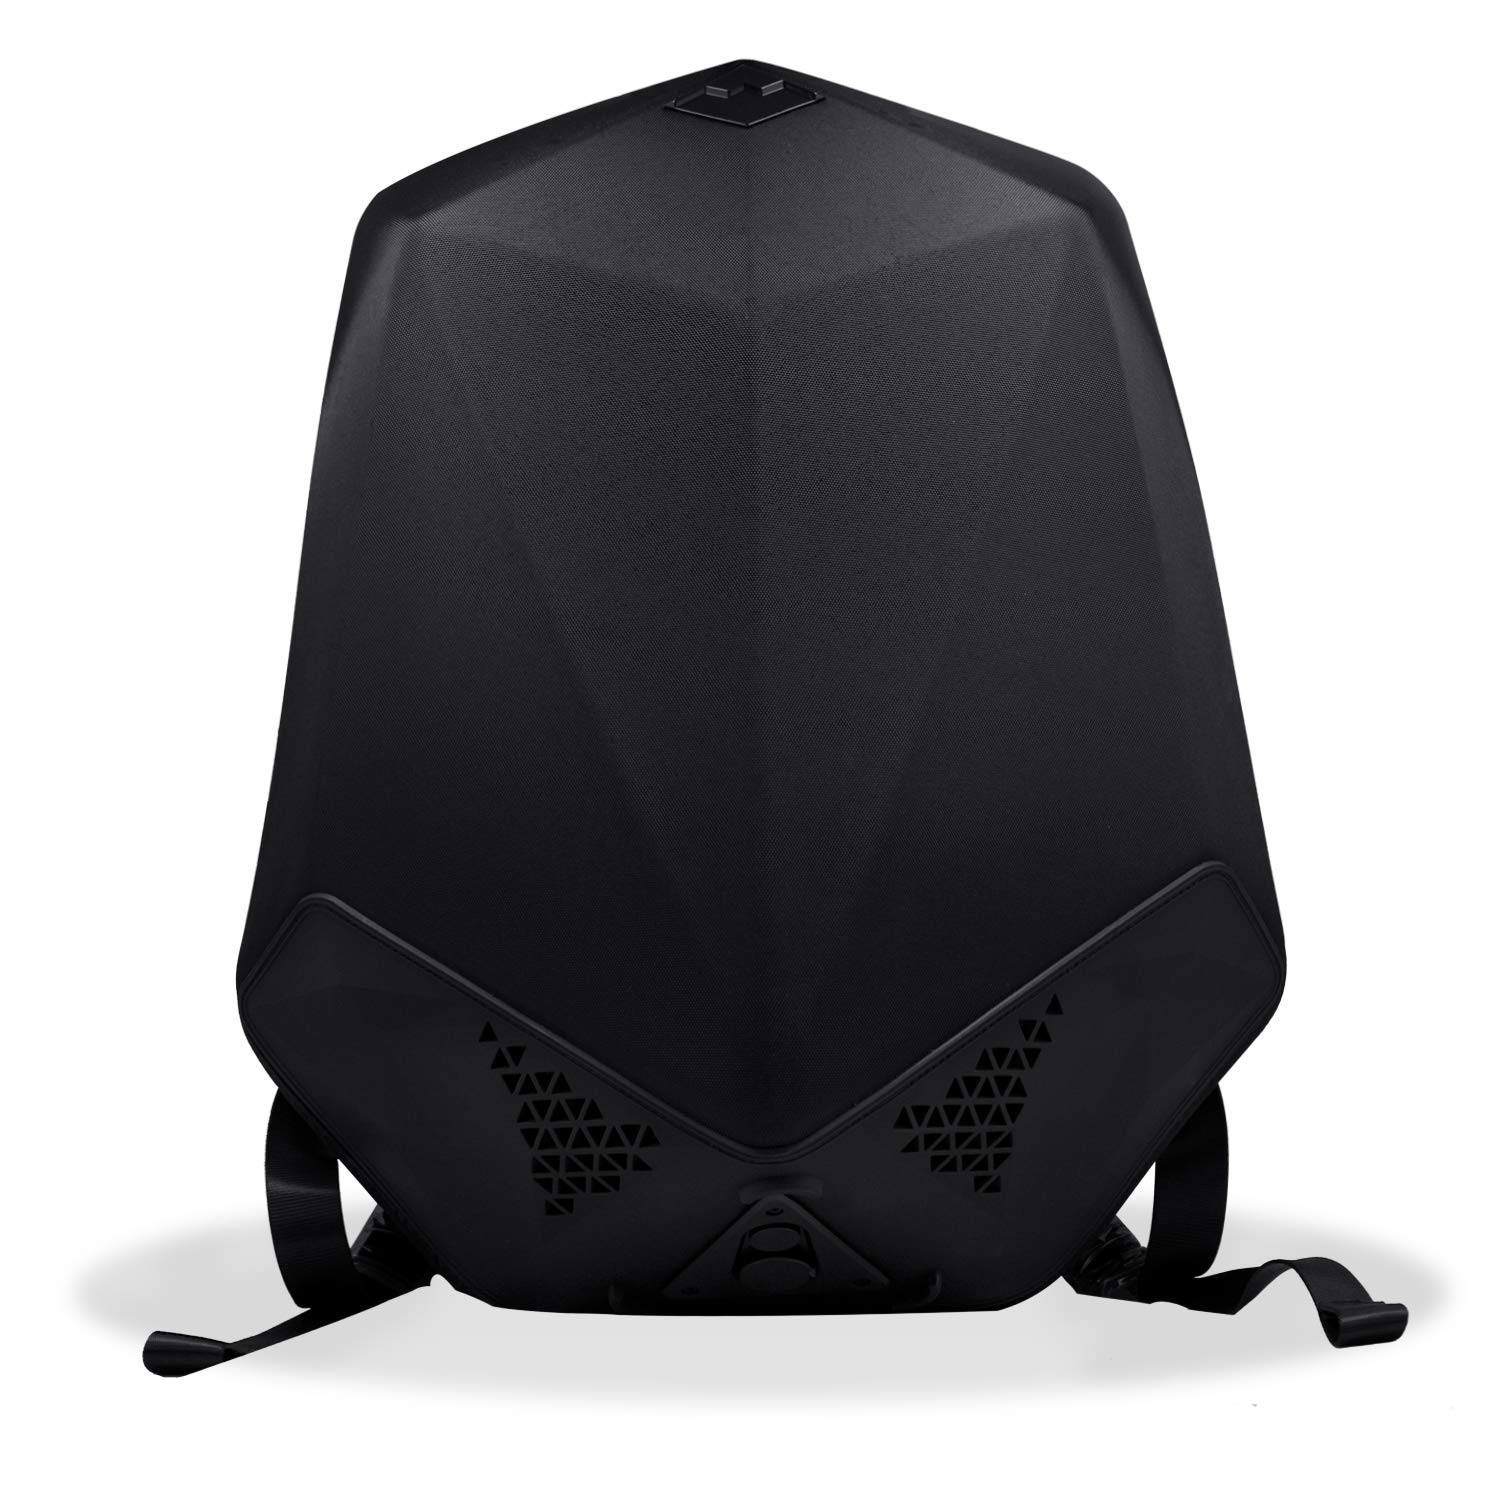 Clearon Electric Bluetooth Backpack Speaker | Portable Charger, EDR Speaker, Nylon Hard-Shell Waterproof Material & Modern Swag Design - image 1 of 6